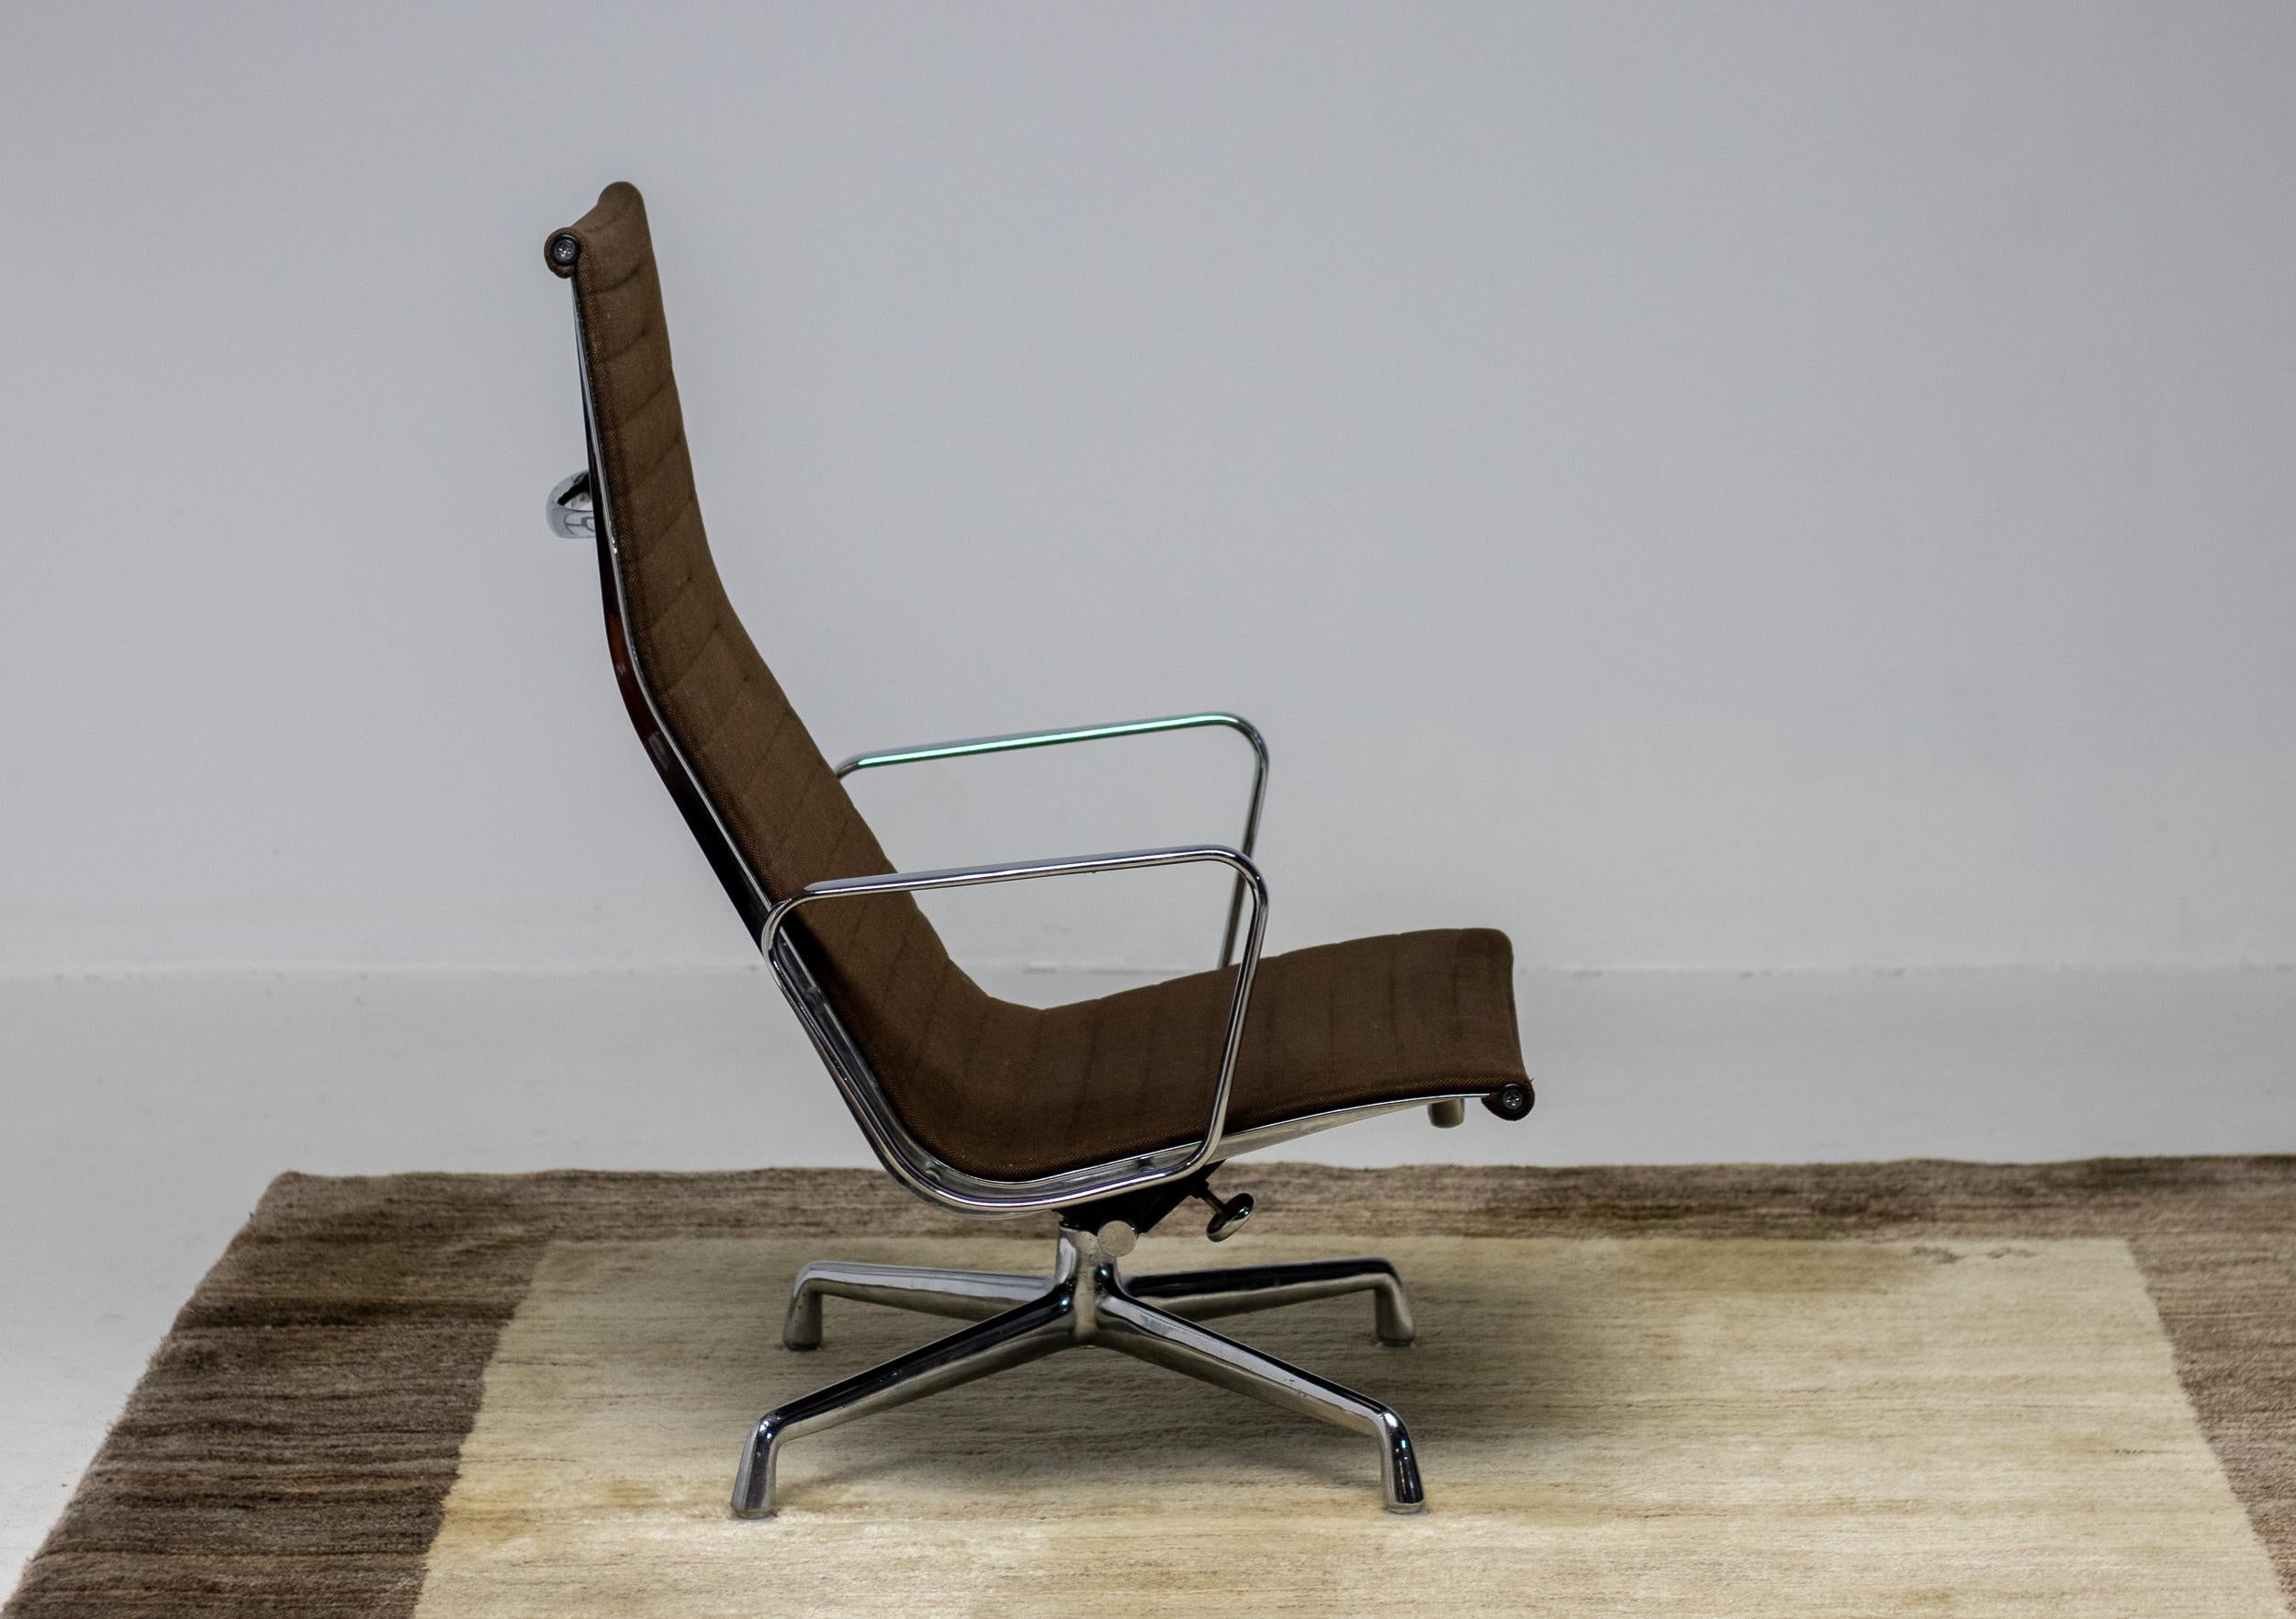 Eames aluminum group lounge chair EA 124 two-tone dark brown Hopsak fabric, manufactured by Herman Miller. The chair is executed in chromed aluminum, swivels and has an adjustable tilting mechanism. 
Desirable very early European version of this